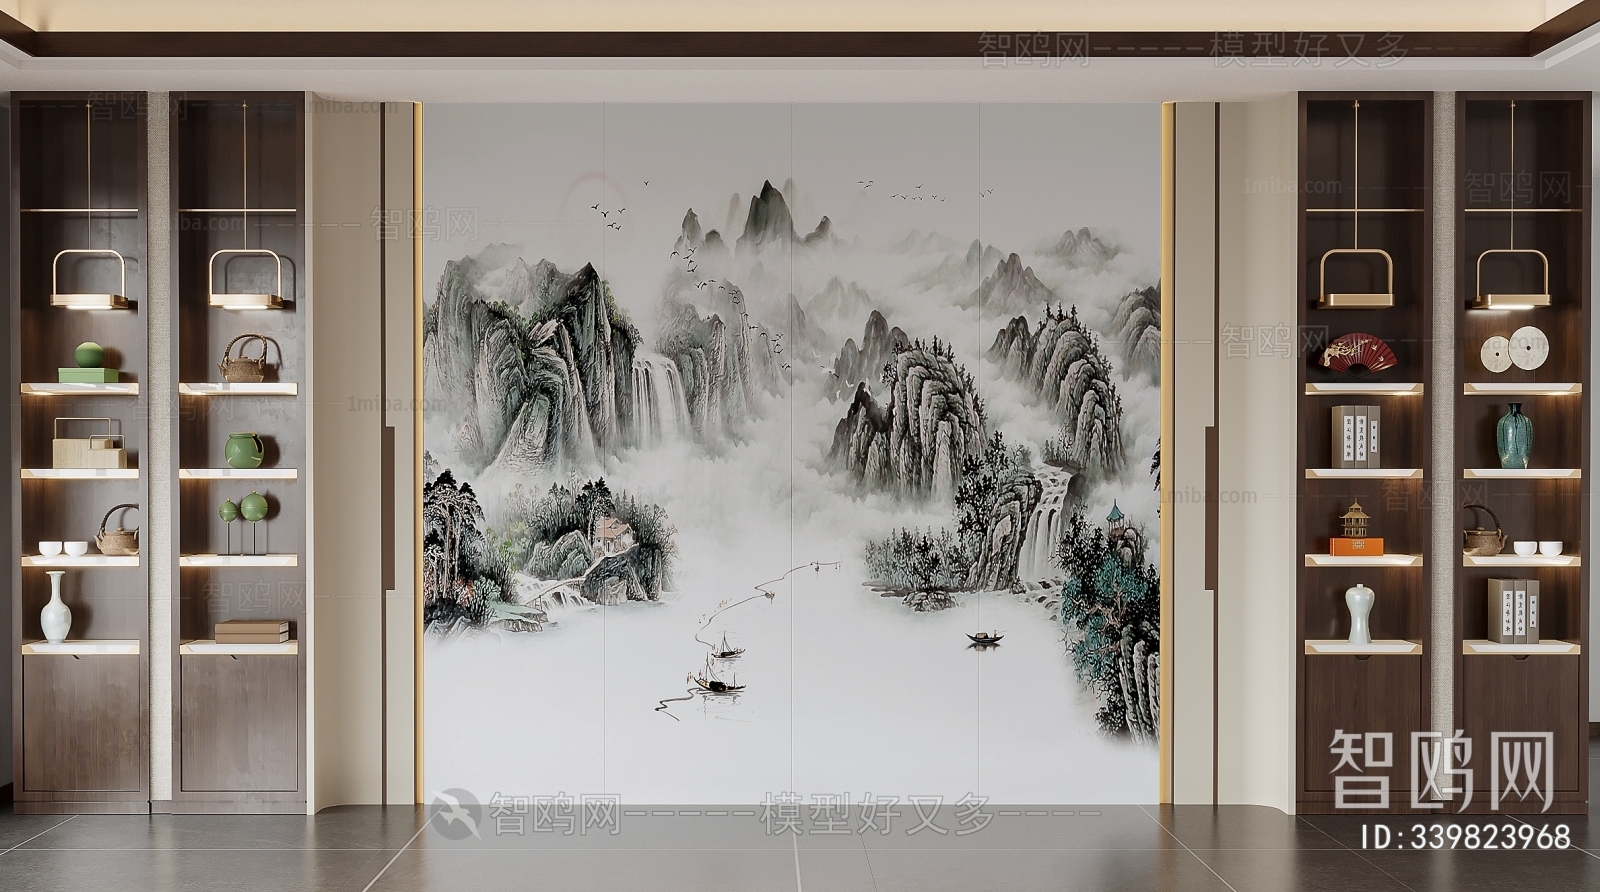 New Chinese Style TV Wall